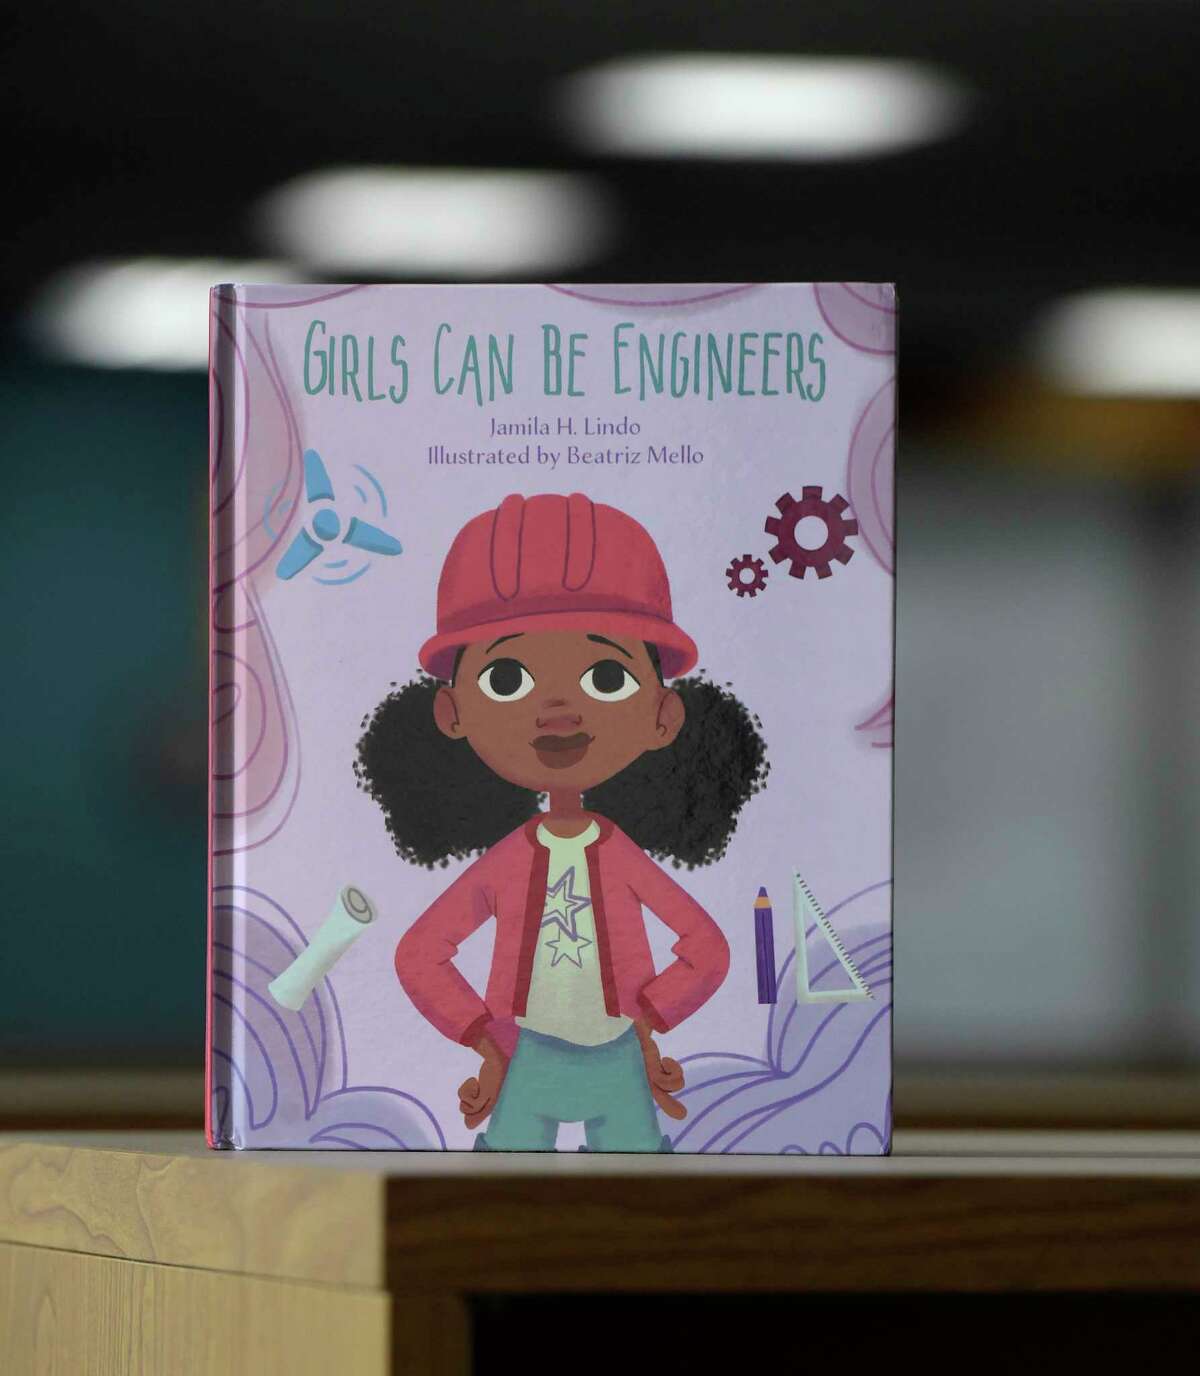 “Girls Can Be Engineers”, written by Jamila Lindo, of Norwalk, is available in the South Norwalk branch of the Norwalk Public Library. The book promotes STEM exploration among girls and encourages them to pursue careers in science, technology, engineering and math. Tuesday, January 10, 2023, Norwalk, Conn.